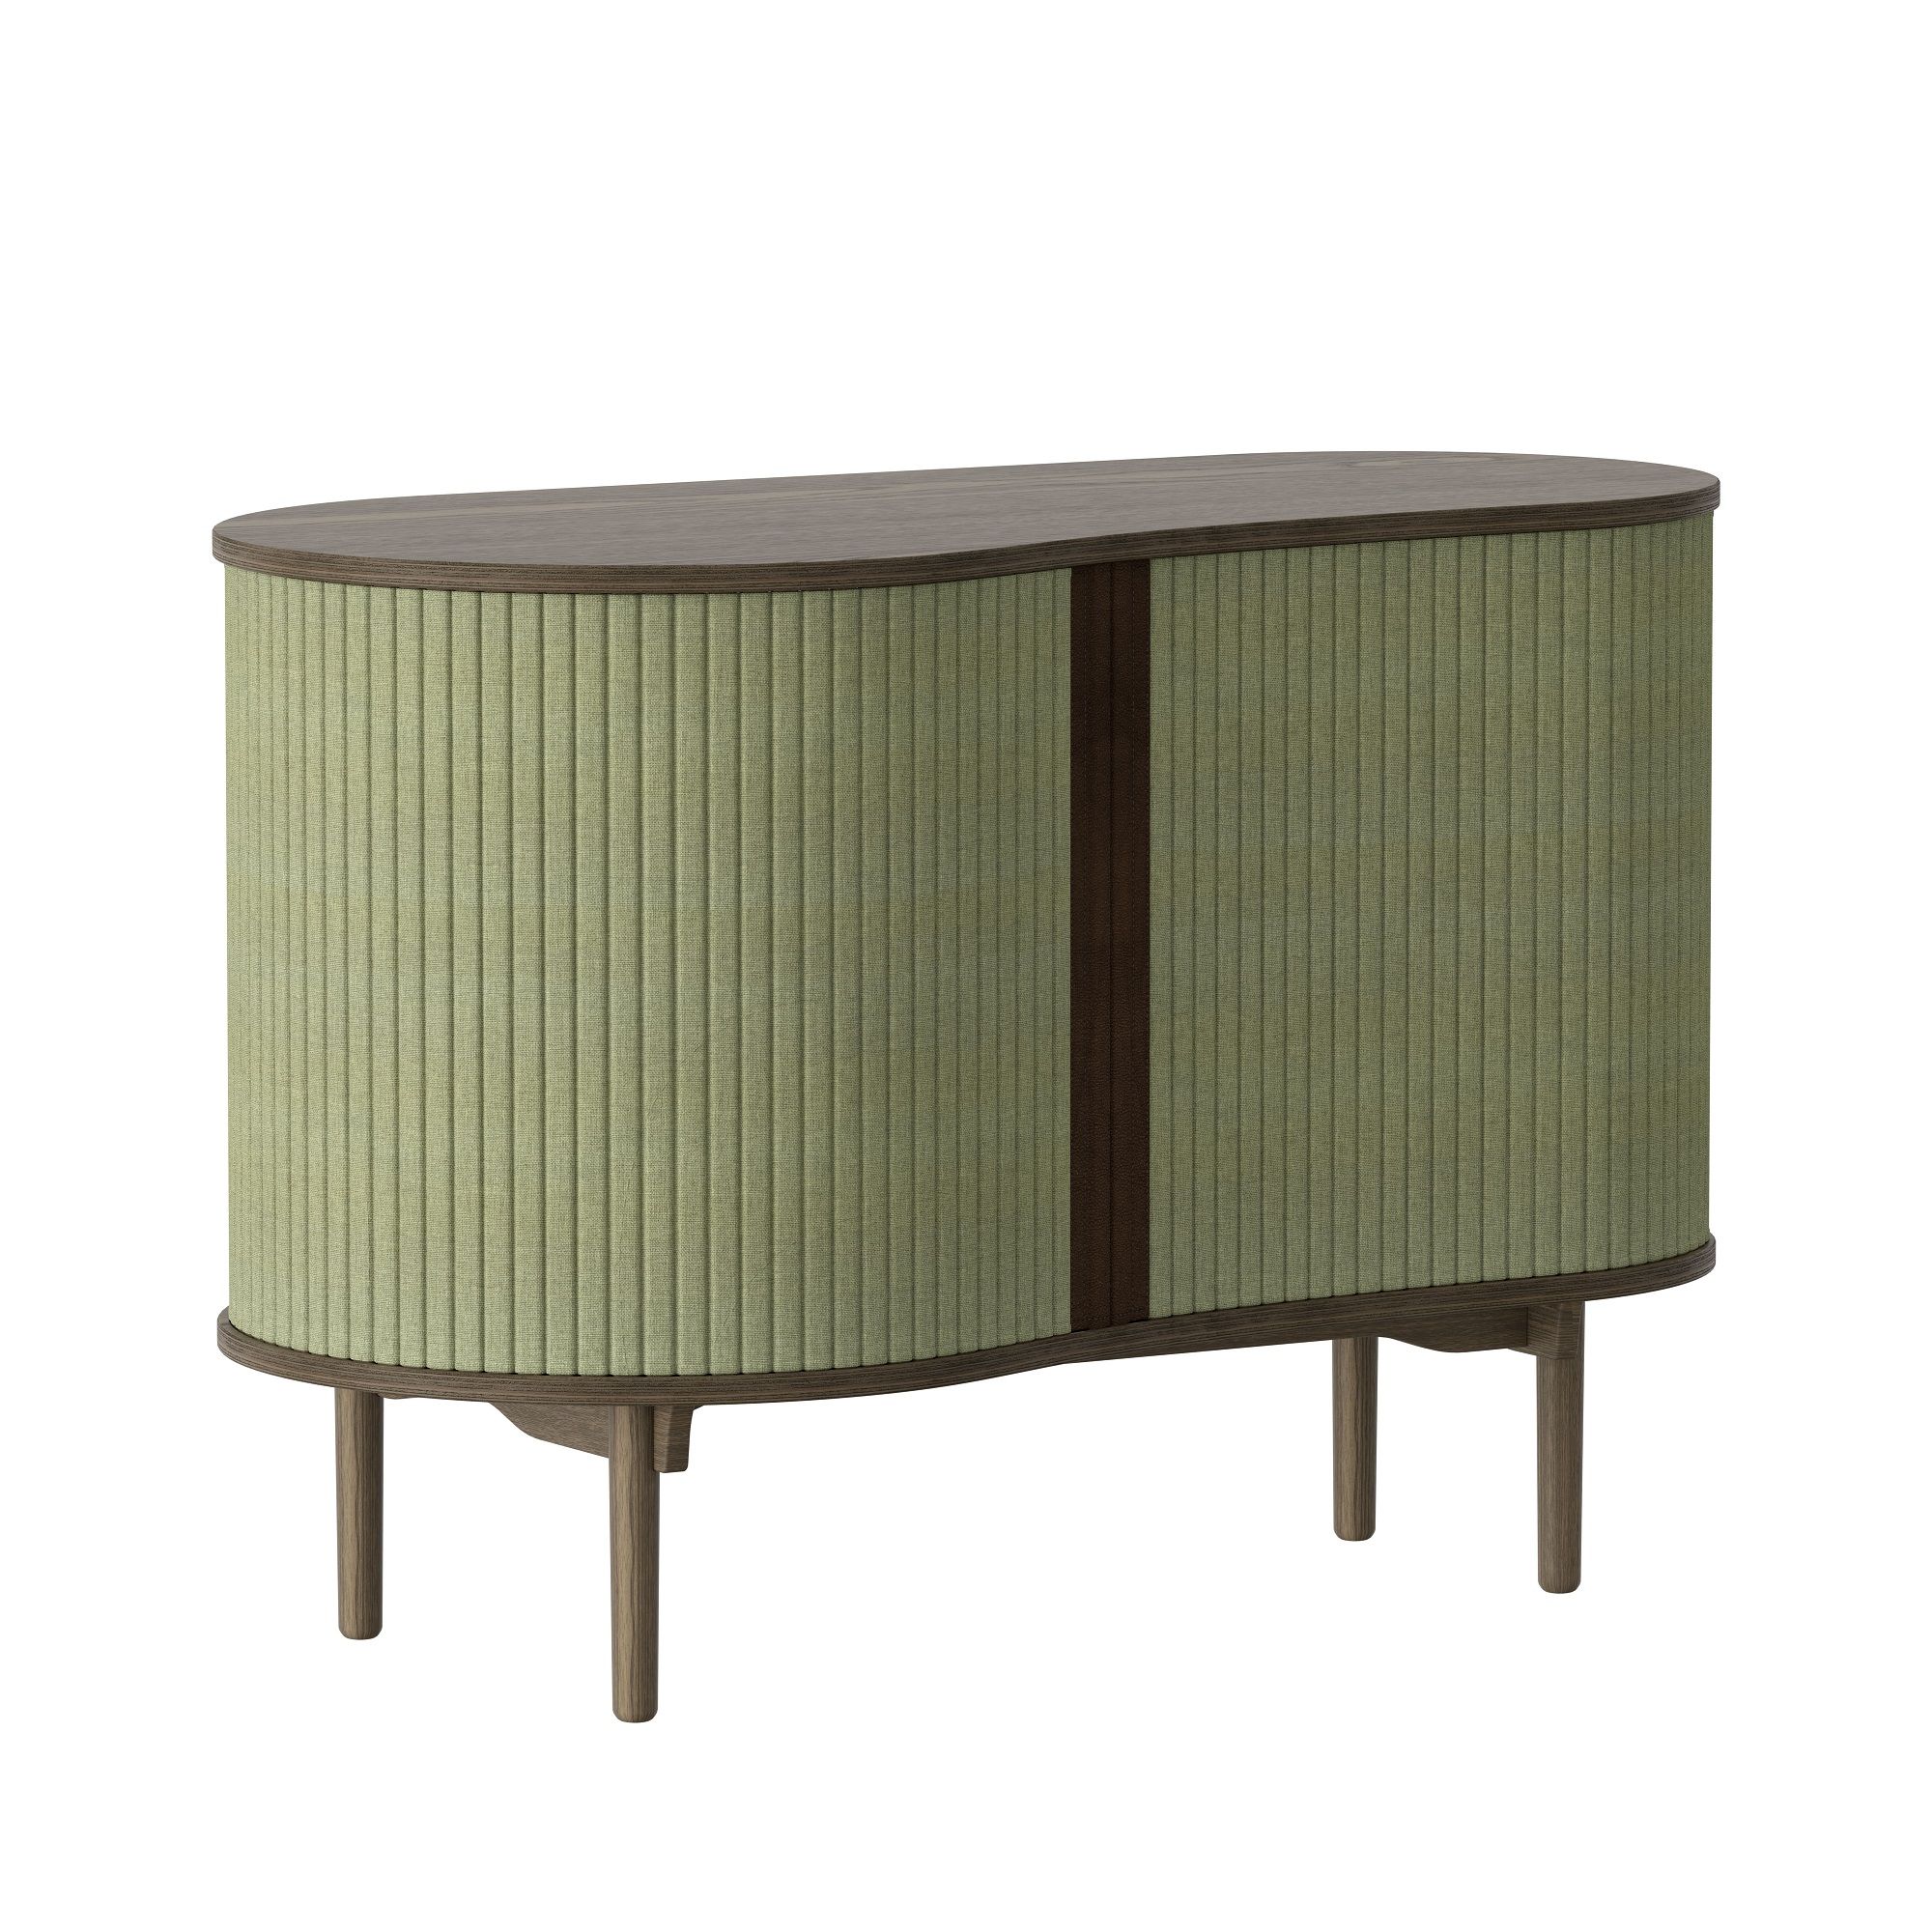 Audacious bedside table, green